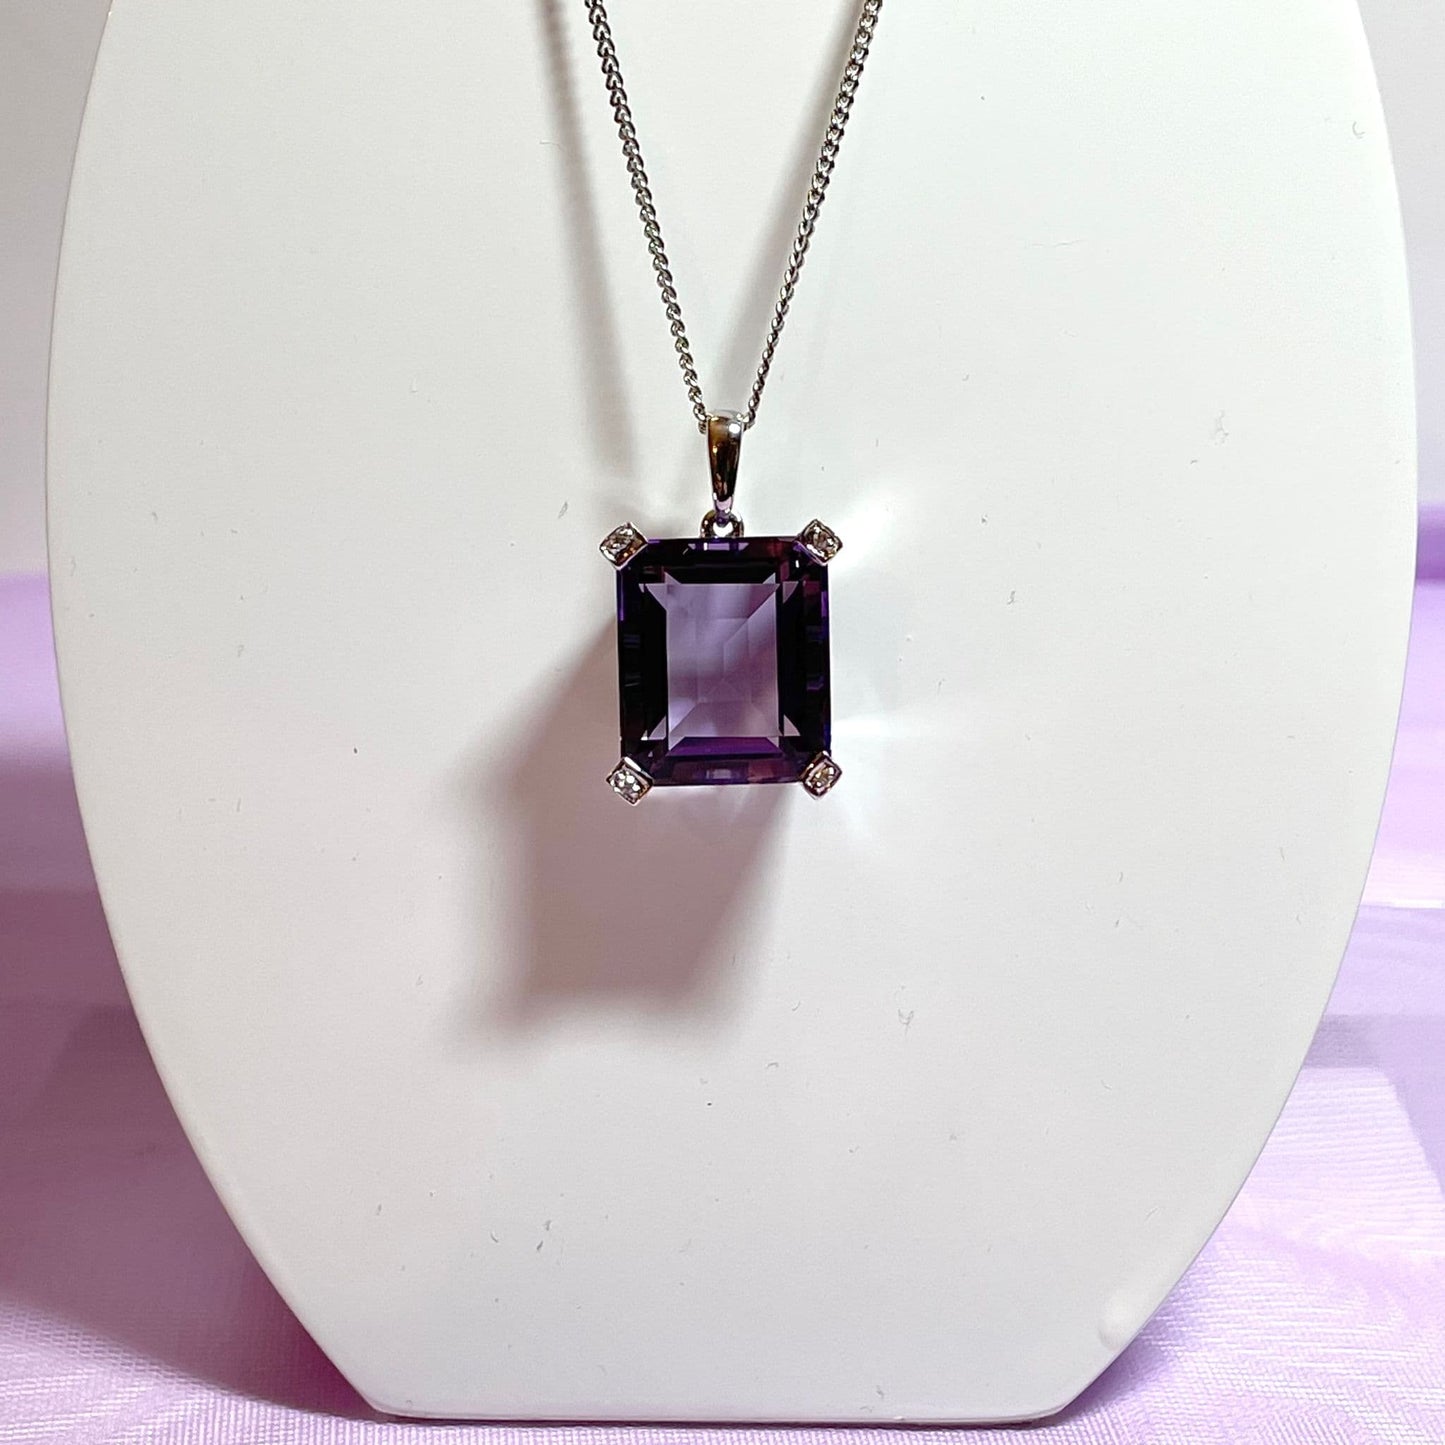 Square shaped purple amethyst and diamond white gold necklace pendant